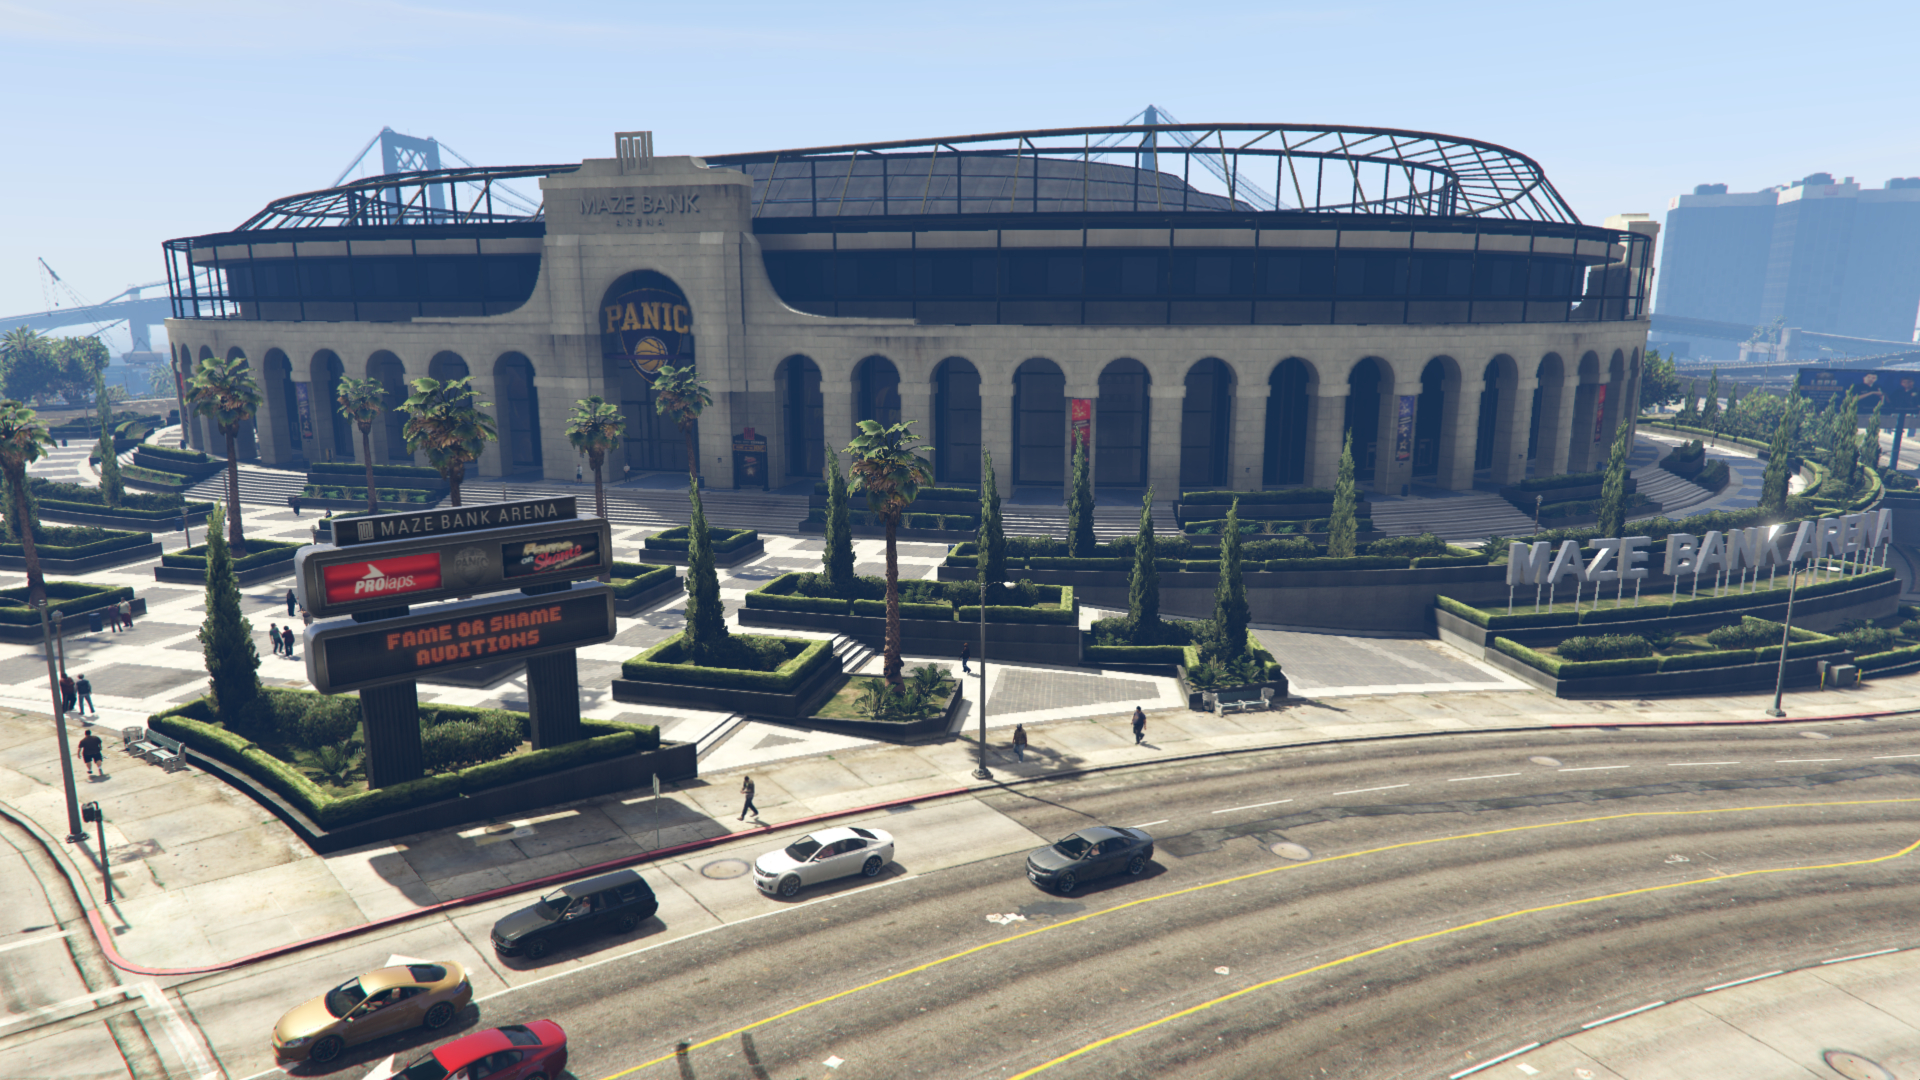 All banks in gta 5 фото 22